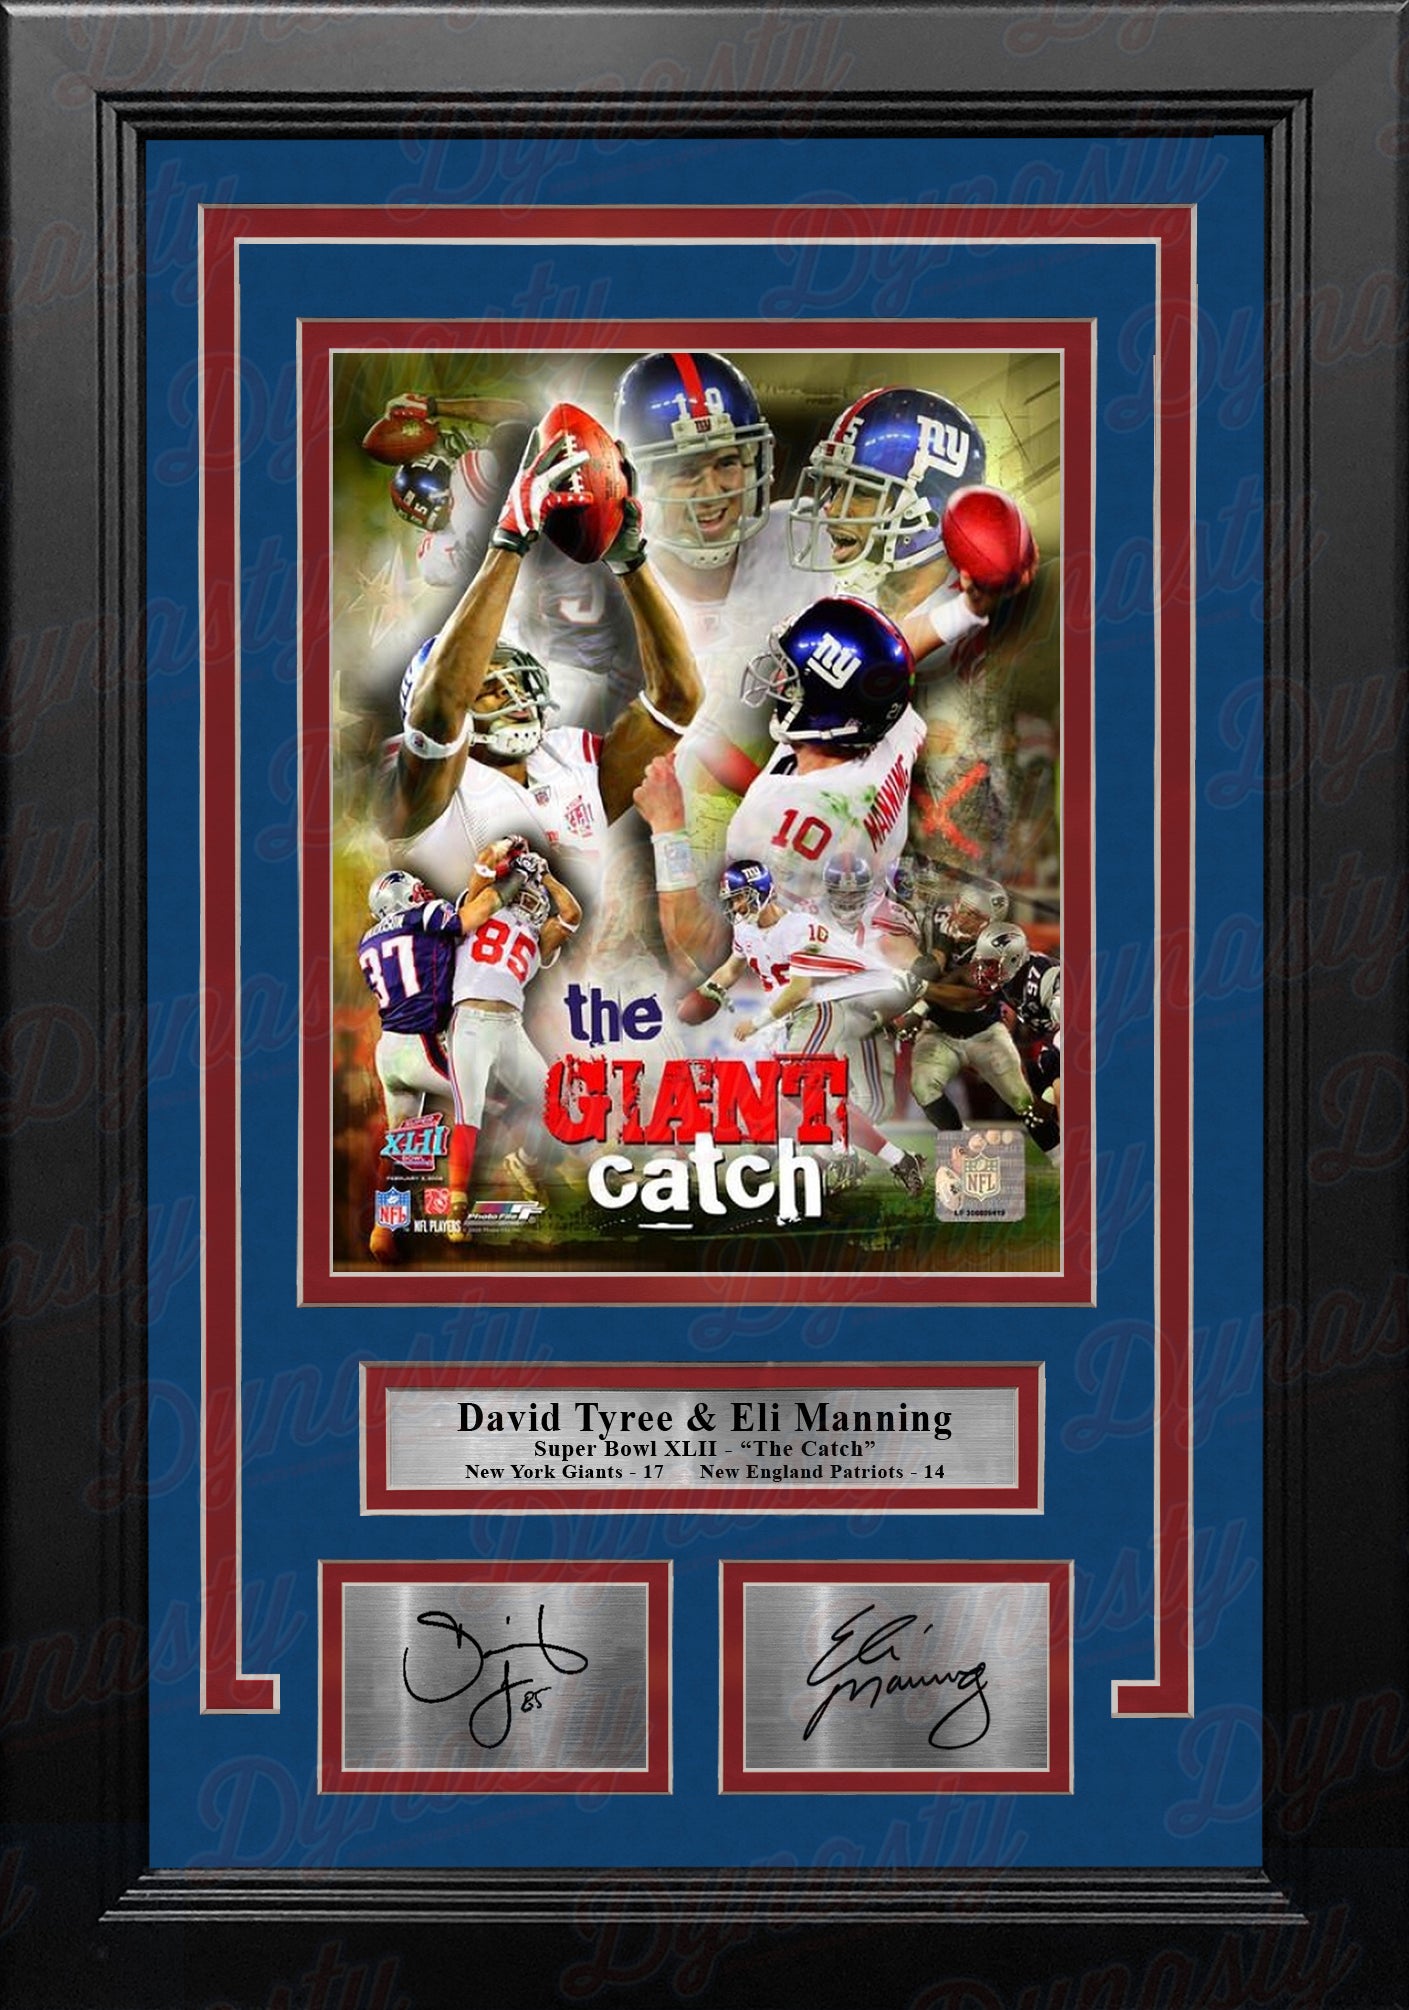 David Tyree & Eli Manning Super Bowl NY Giants 8x10 Framed Collage Photo with Engraved Autographs - Dynasty Sports & Framing 